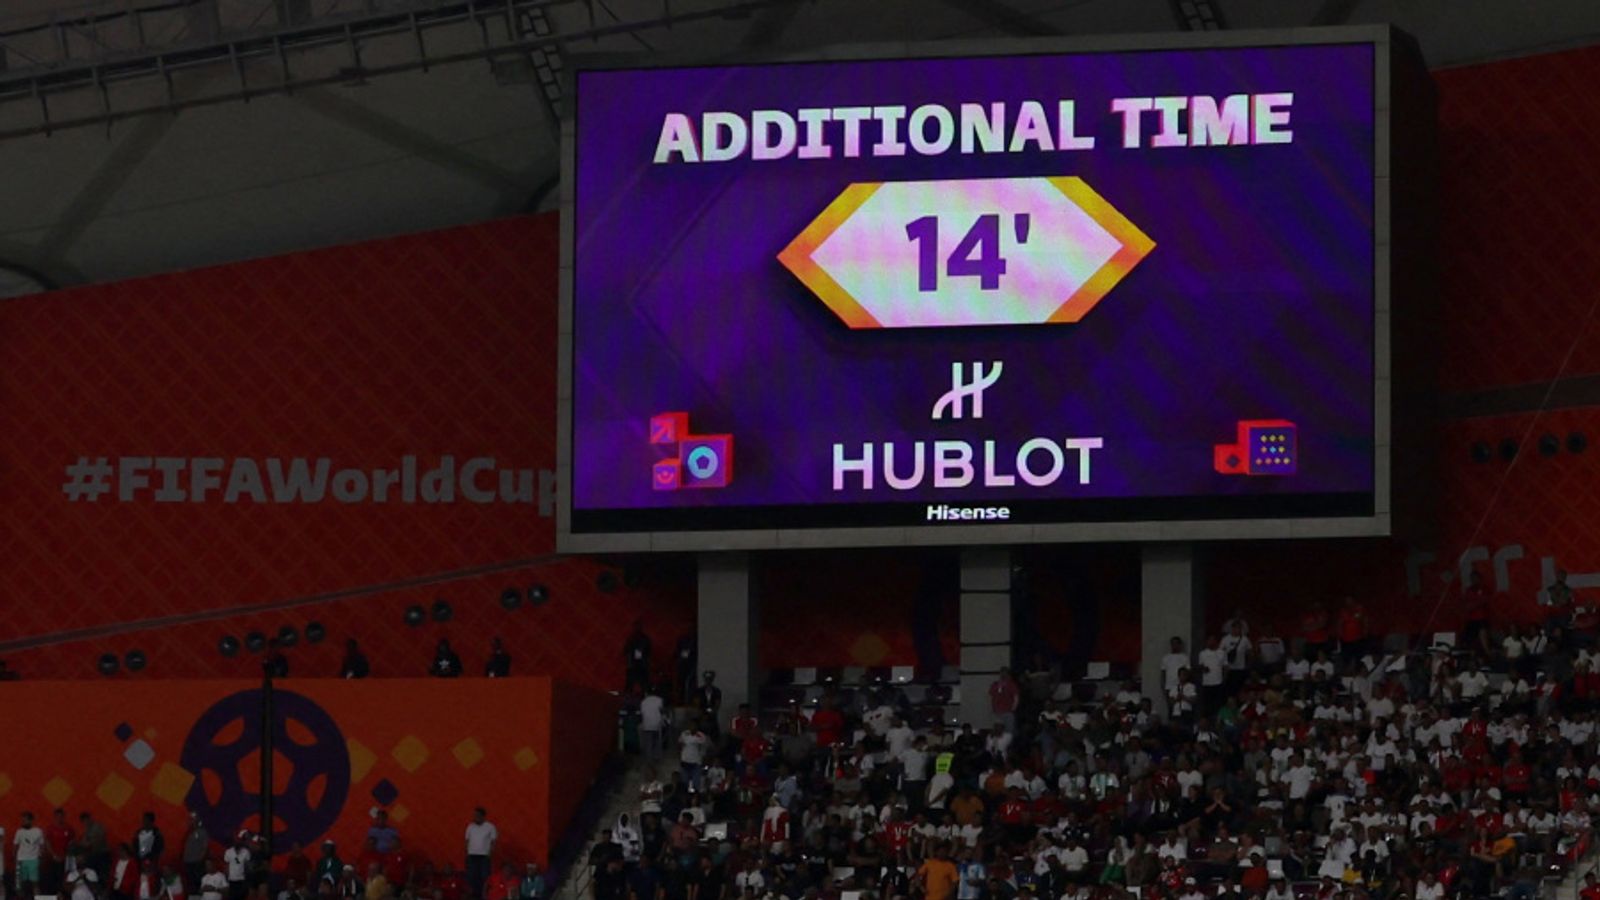 World Cup 2022: Why is so much stoppage time being added to games?